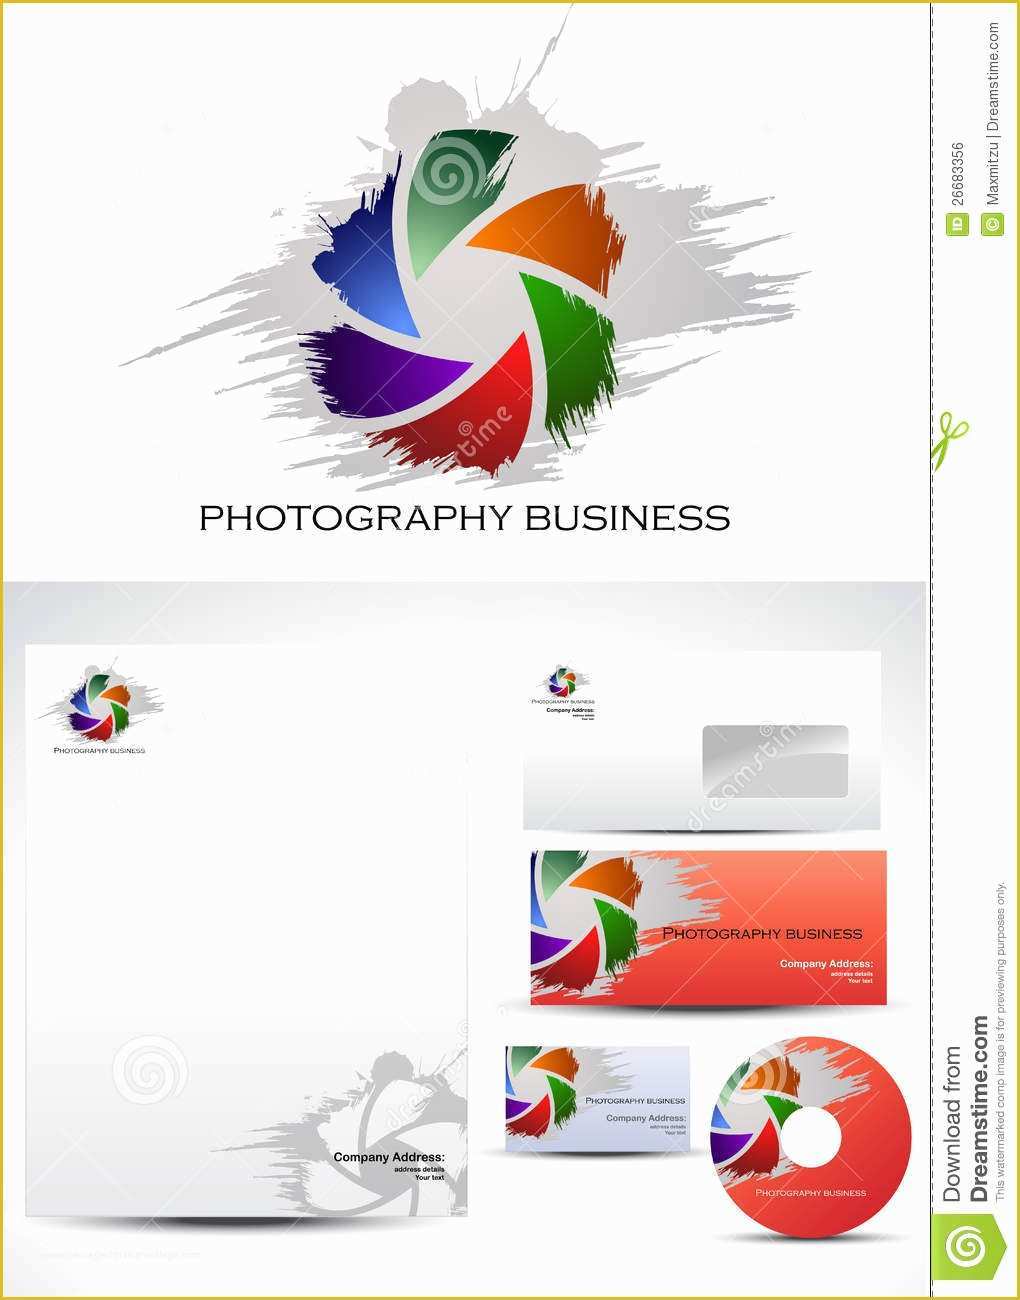 Free Photography Watermark Template Of Graphy Template Logo Design Stock Vector Image